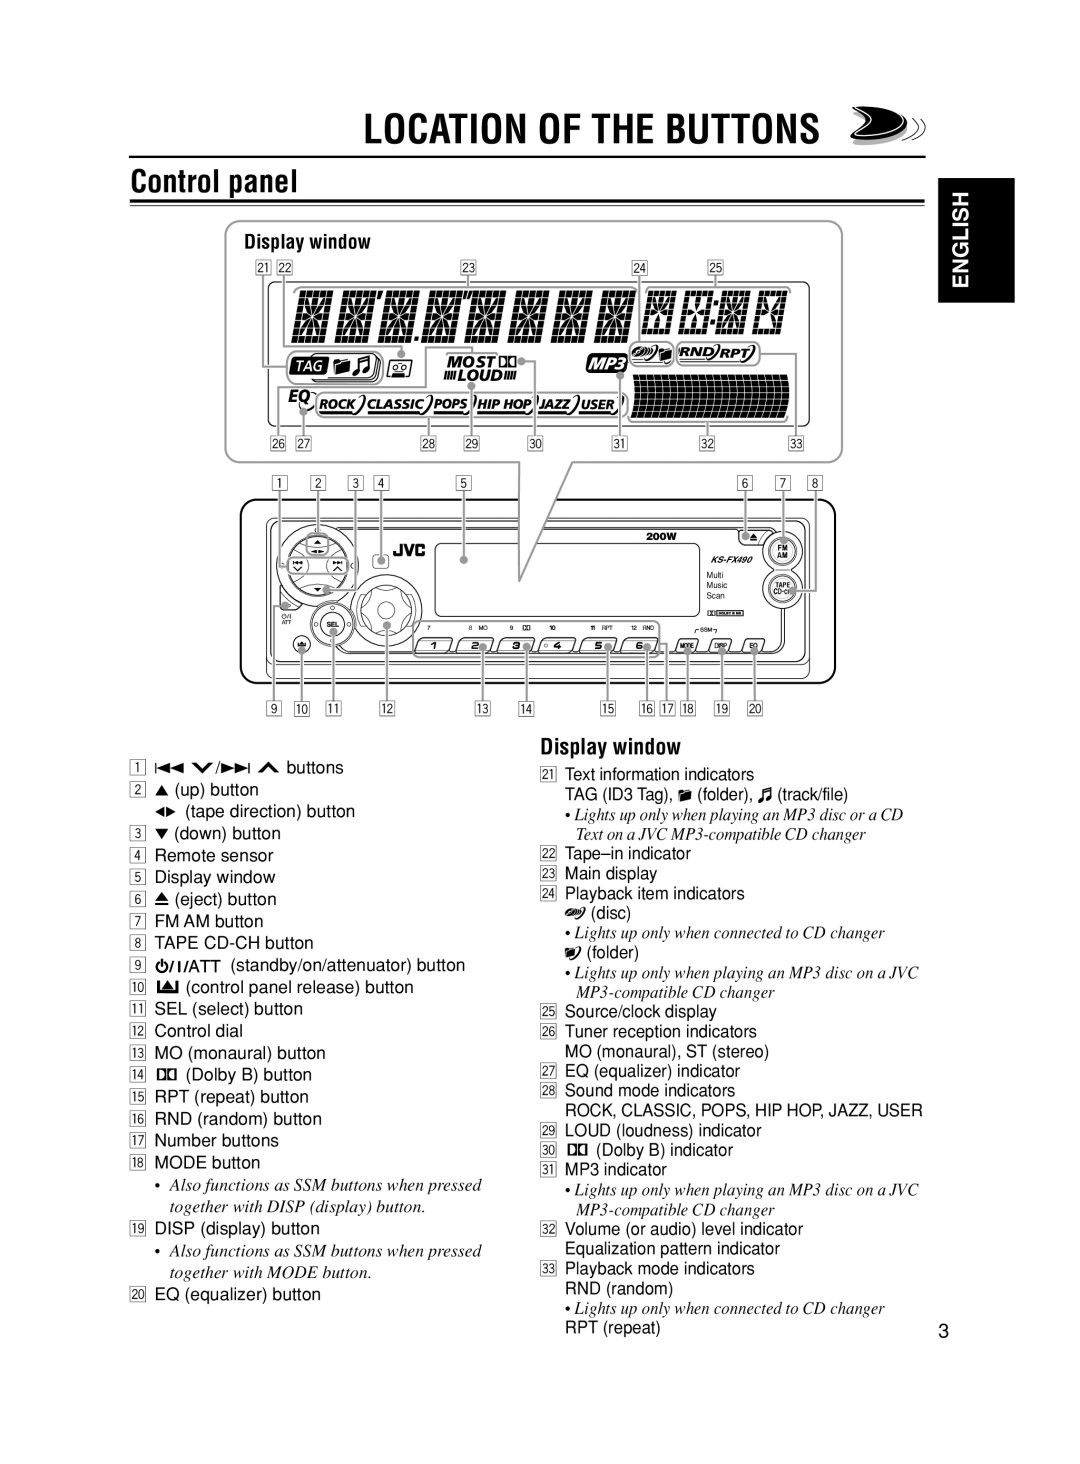 JVC KS-FX490 manual Location Of The Buttons, Control panel, English, Display window 